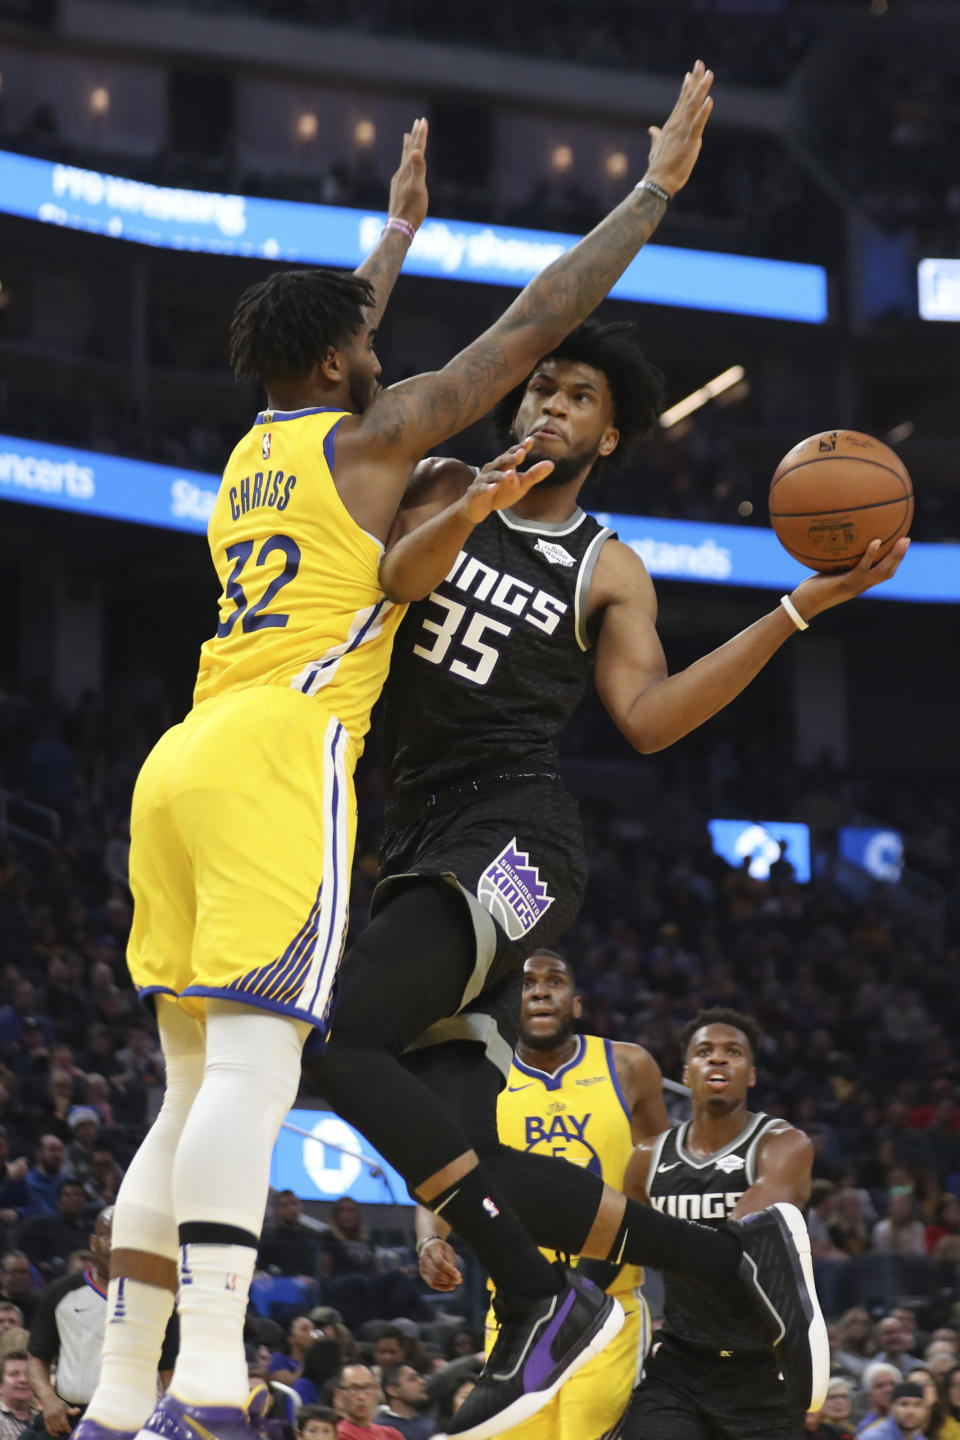 Sacramento Kings forward Marvin Bagley III (35) shoots against Golden State Warriors forward Marquese Chriss (32) during the first half of an NBA basketball game in San Francisco, Sunday, Dec. 15, 2019. (AP Photo/Jed Jacobsohn)